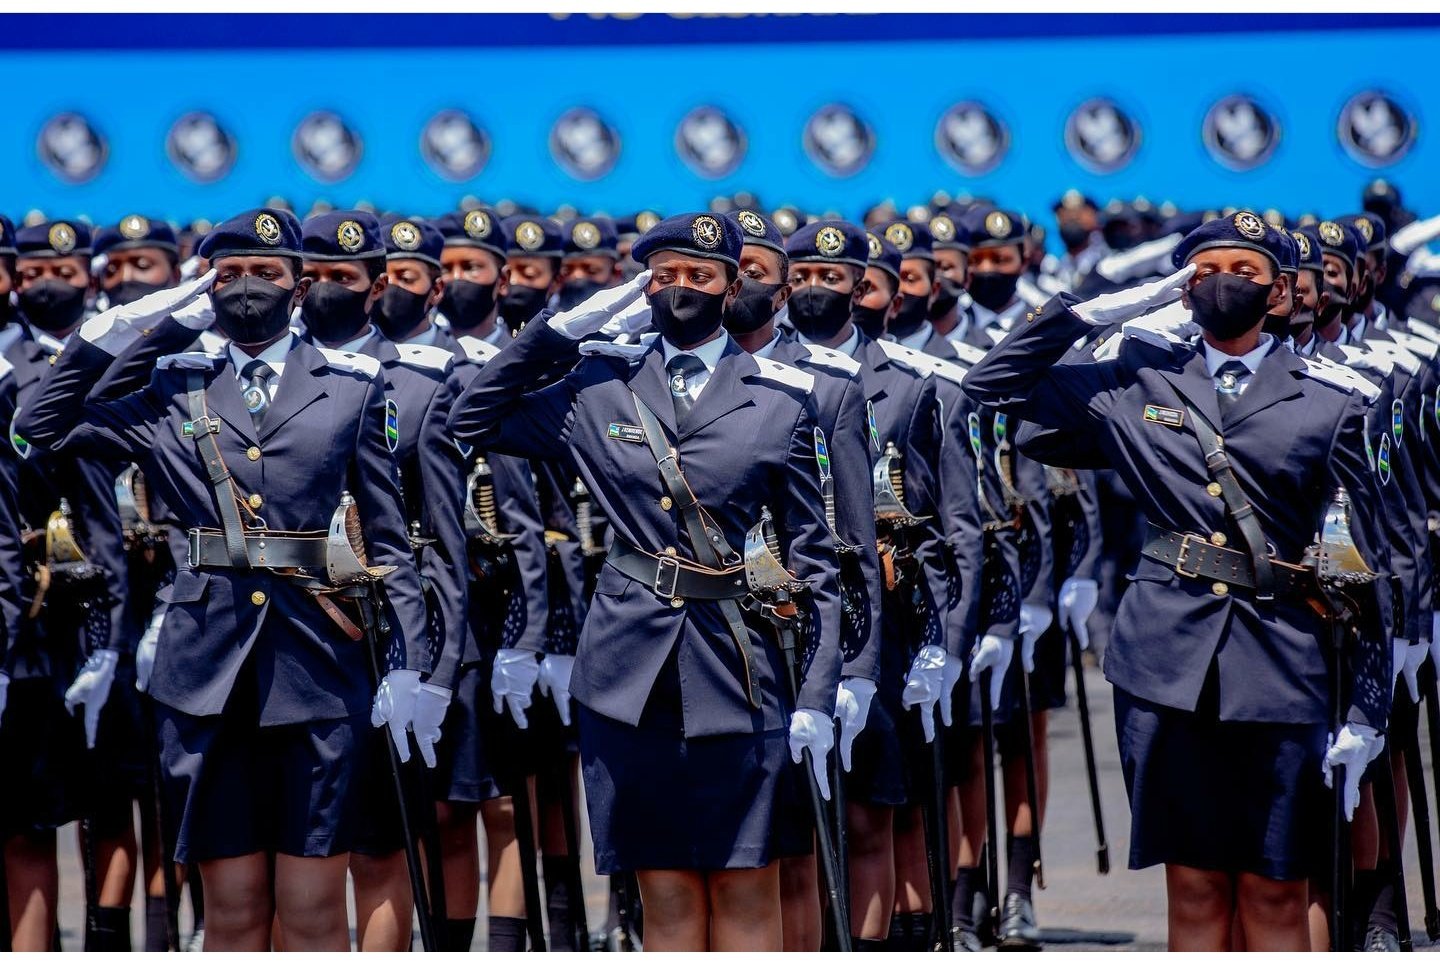 Rwanda National Police Gains New Officers, As Class of 2021 Swells Their Ranks